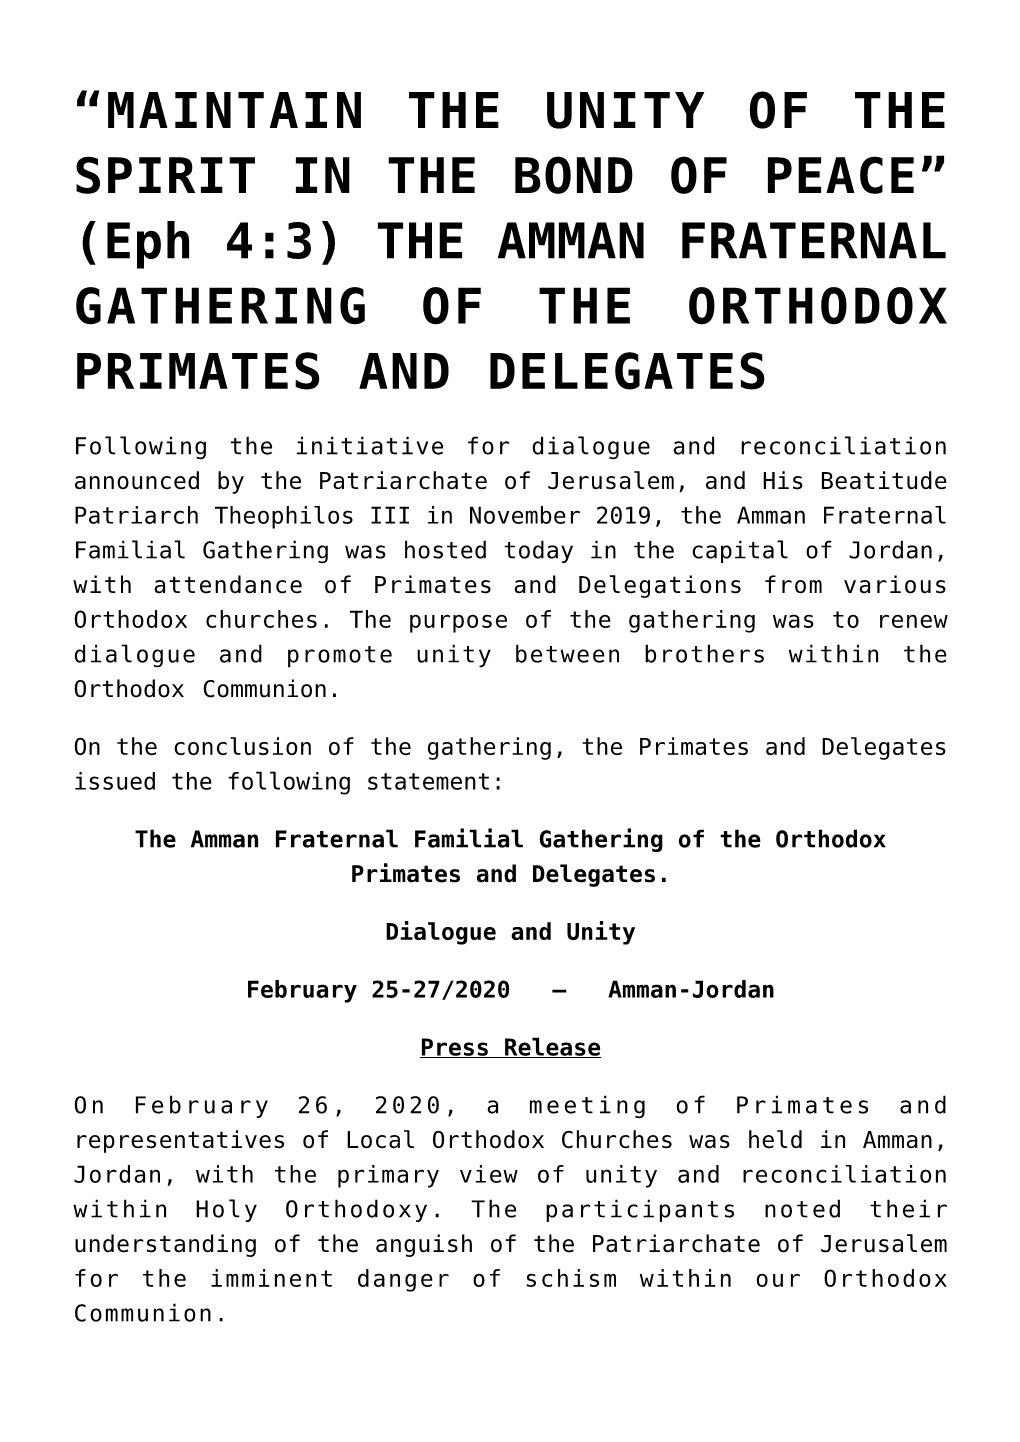 (Eph 4:3) the AMMAN FRATERNAL GATHERING of the ORTHODOX PRIMATES and DELEGATES